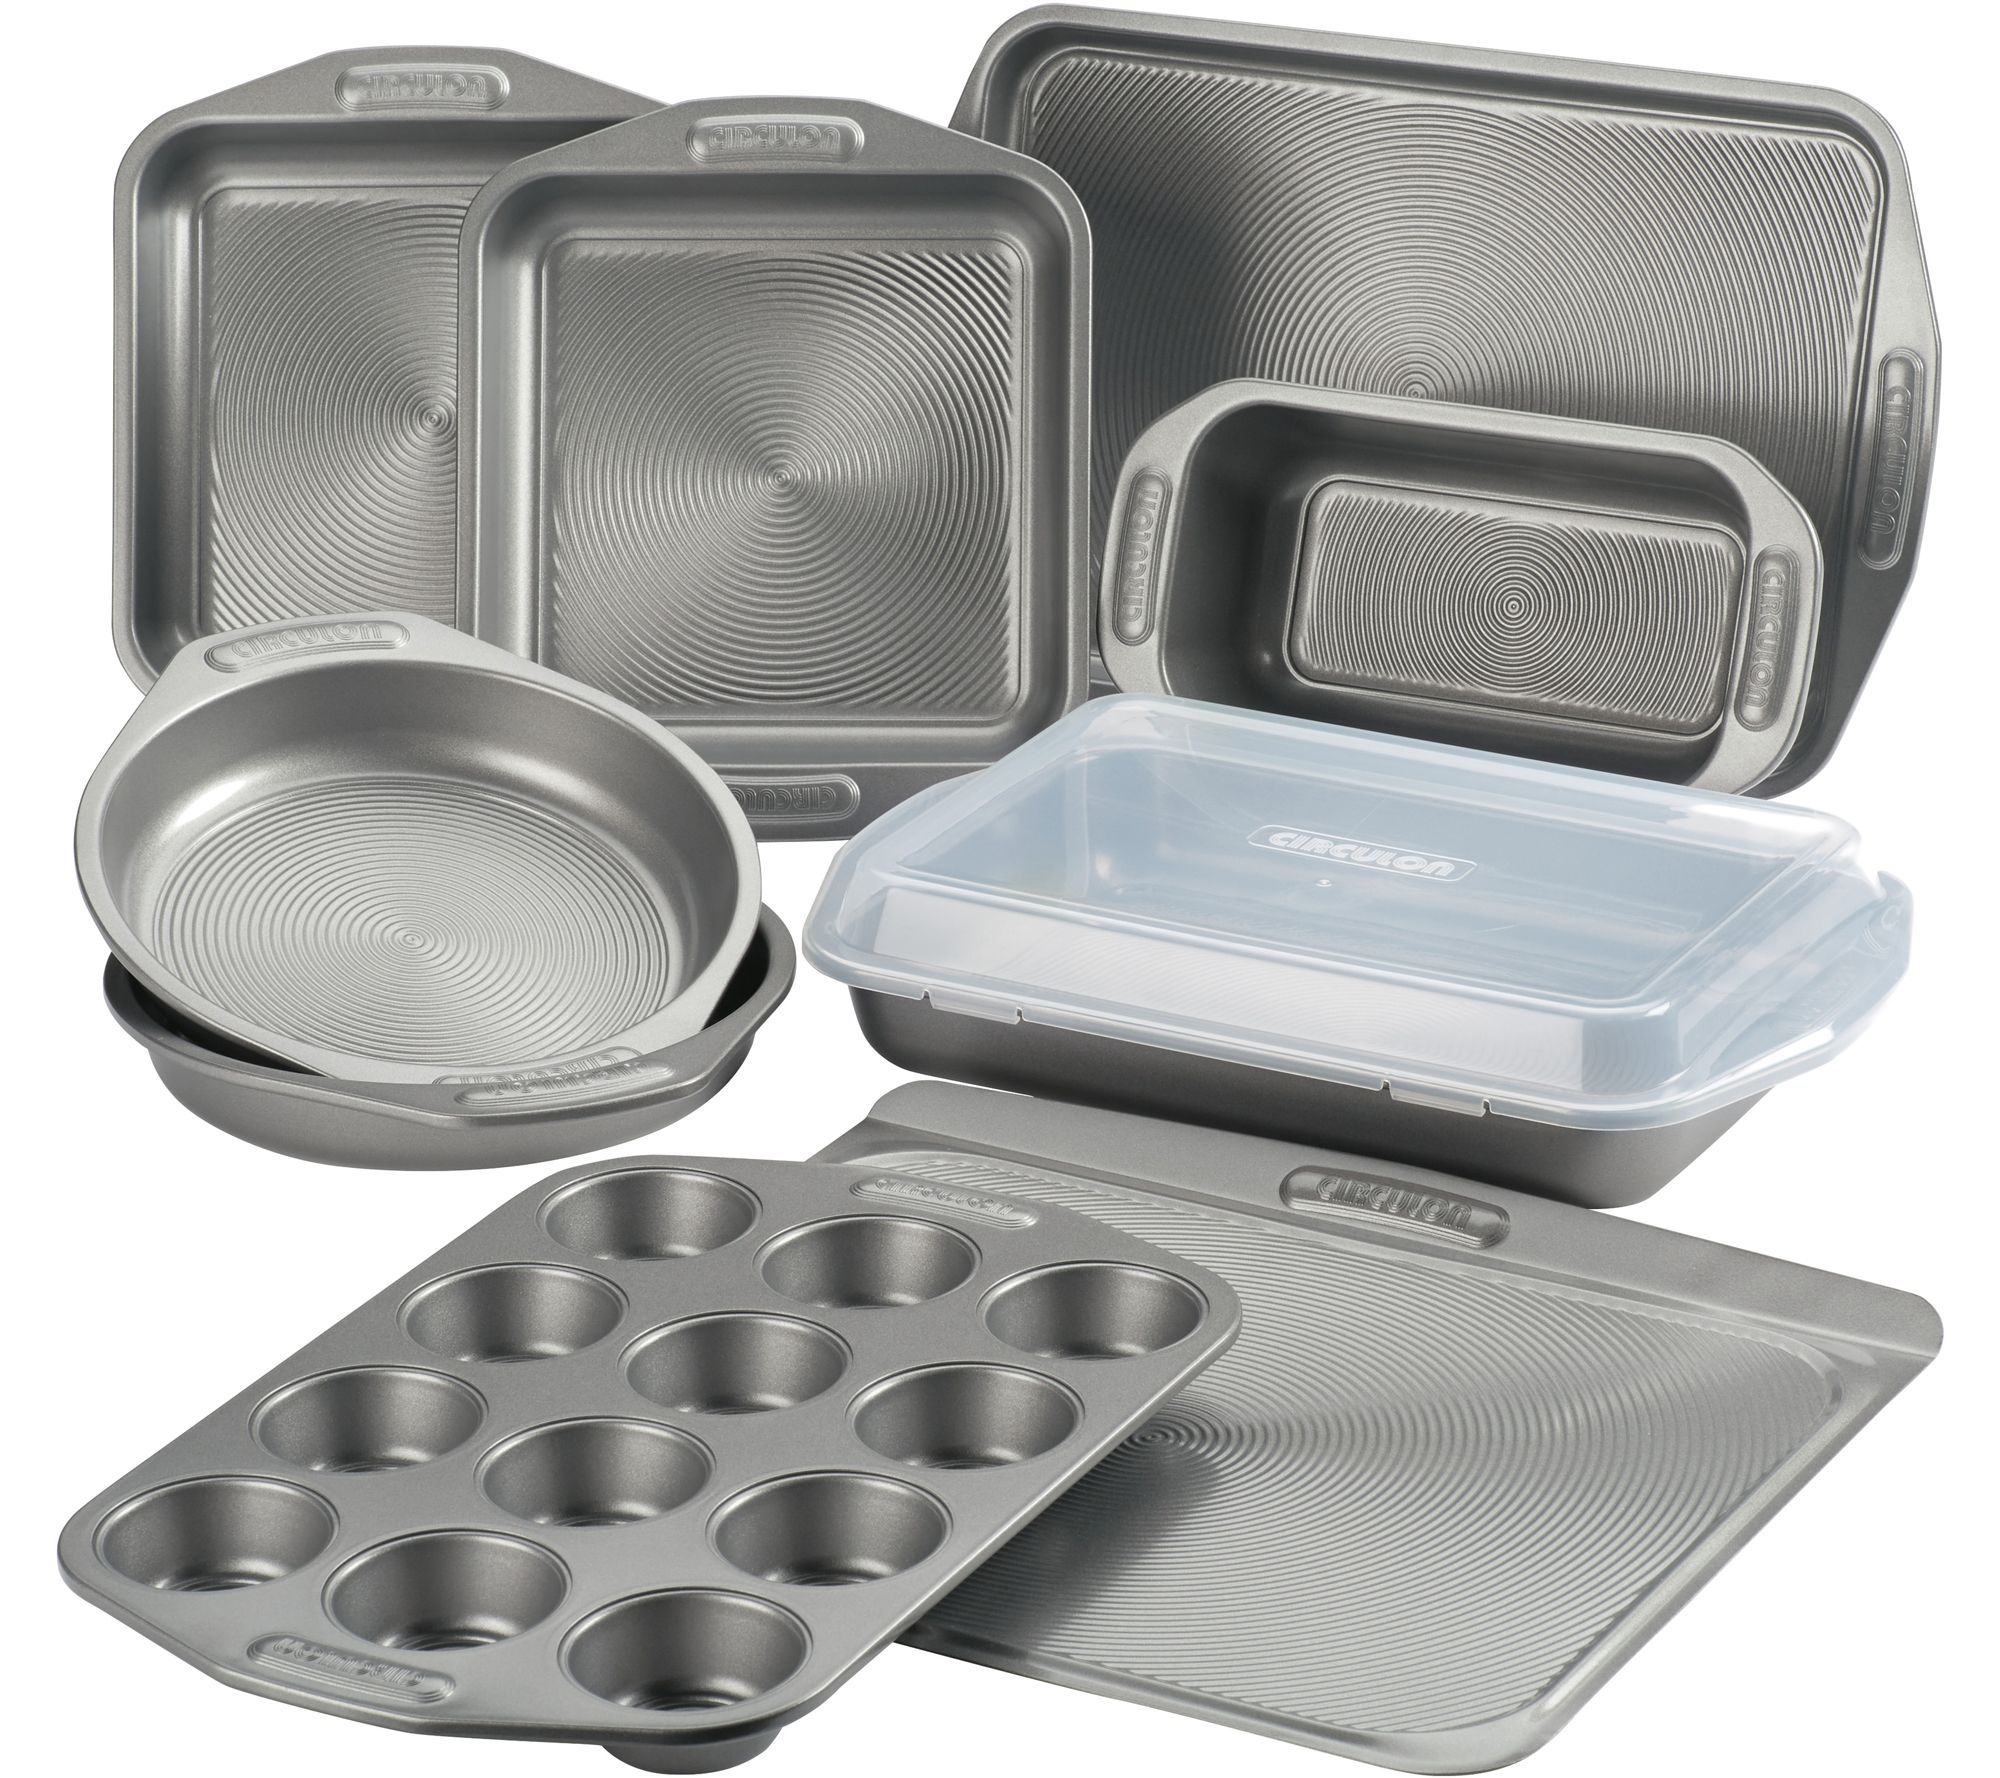 All-Clad Pro-Release Bakeware Pan, 9 In x 1.75 In, Grey